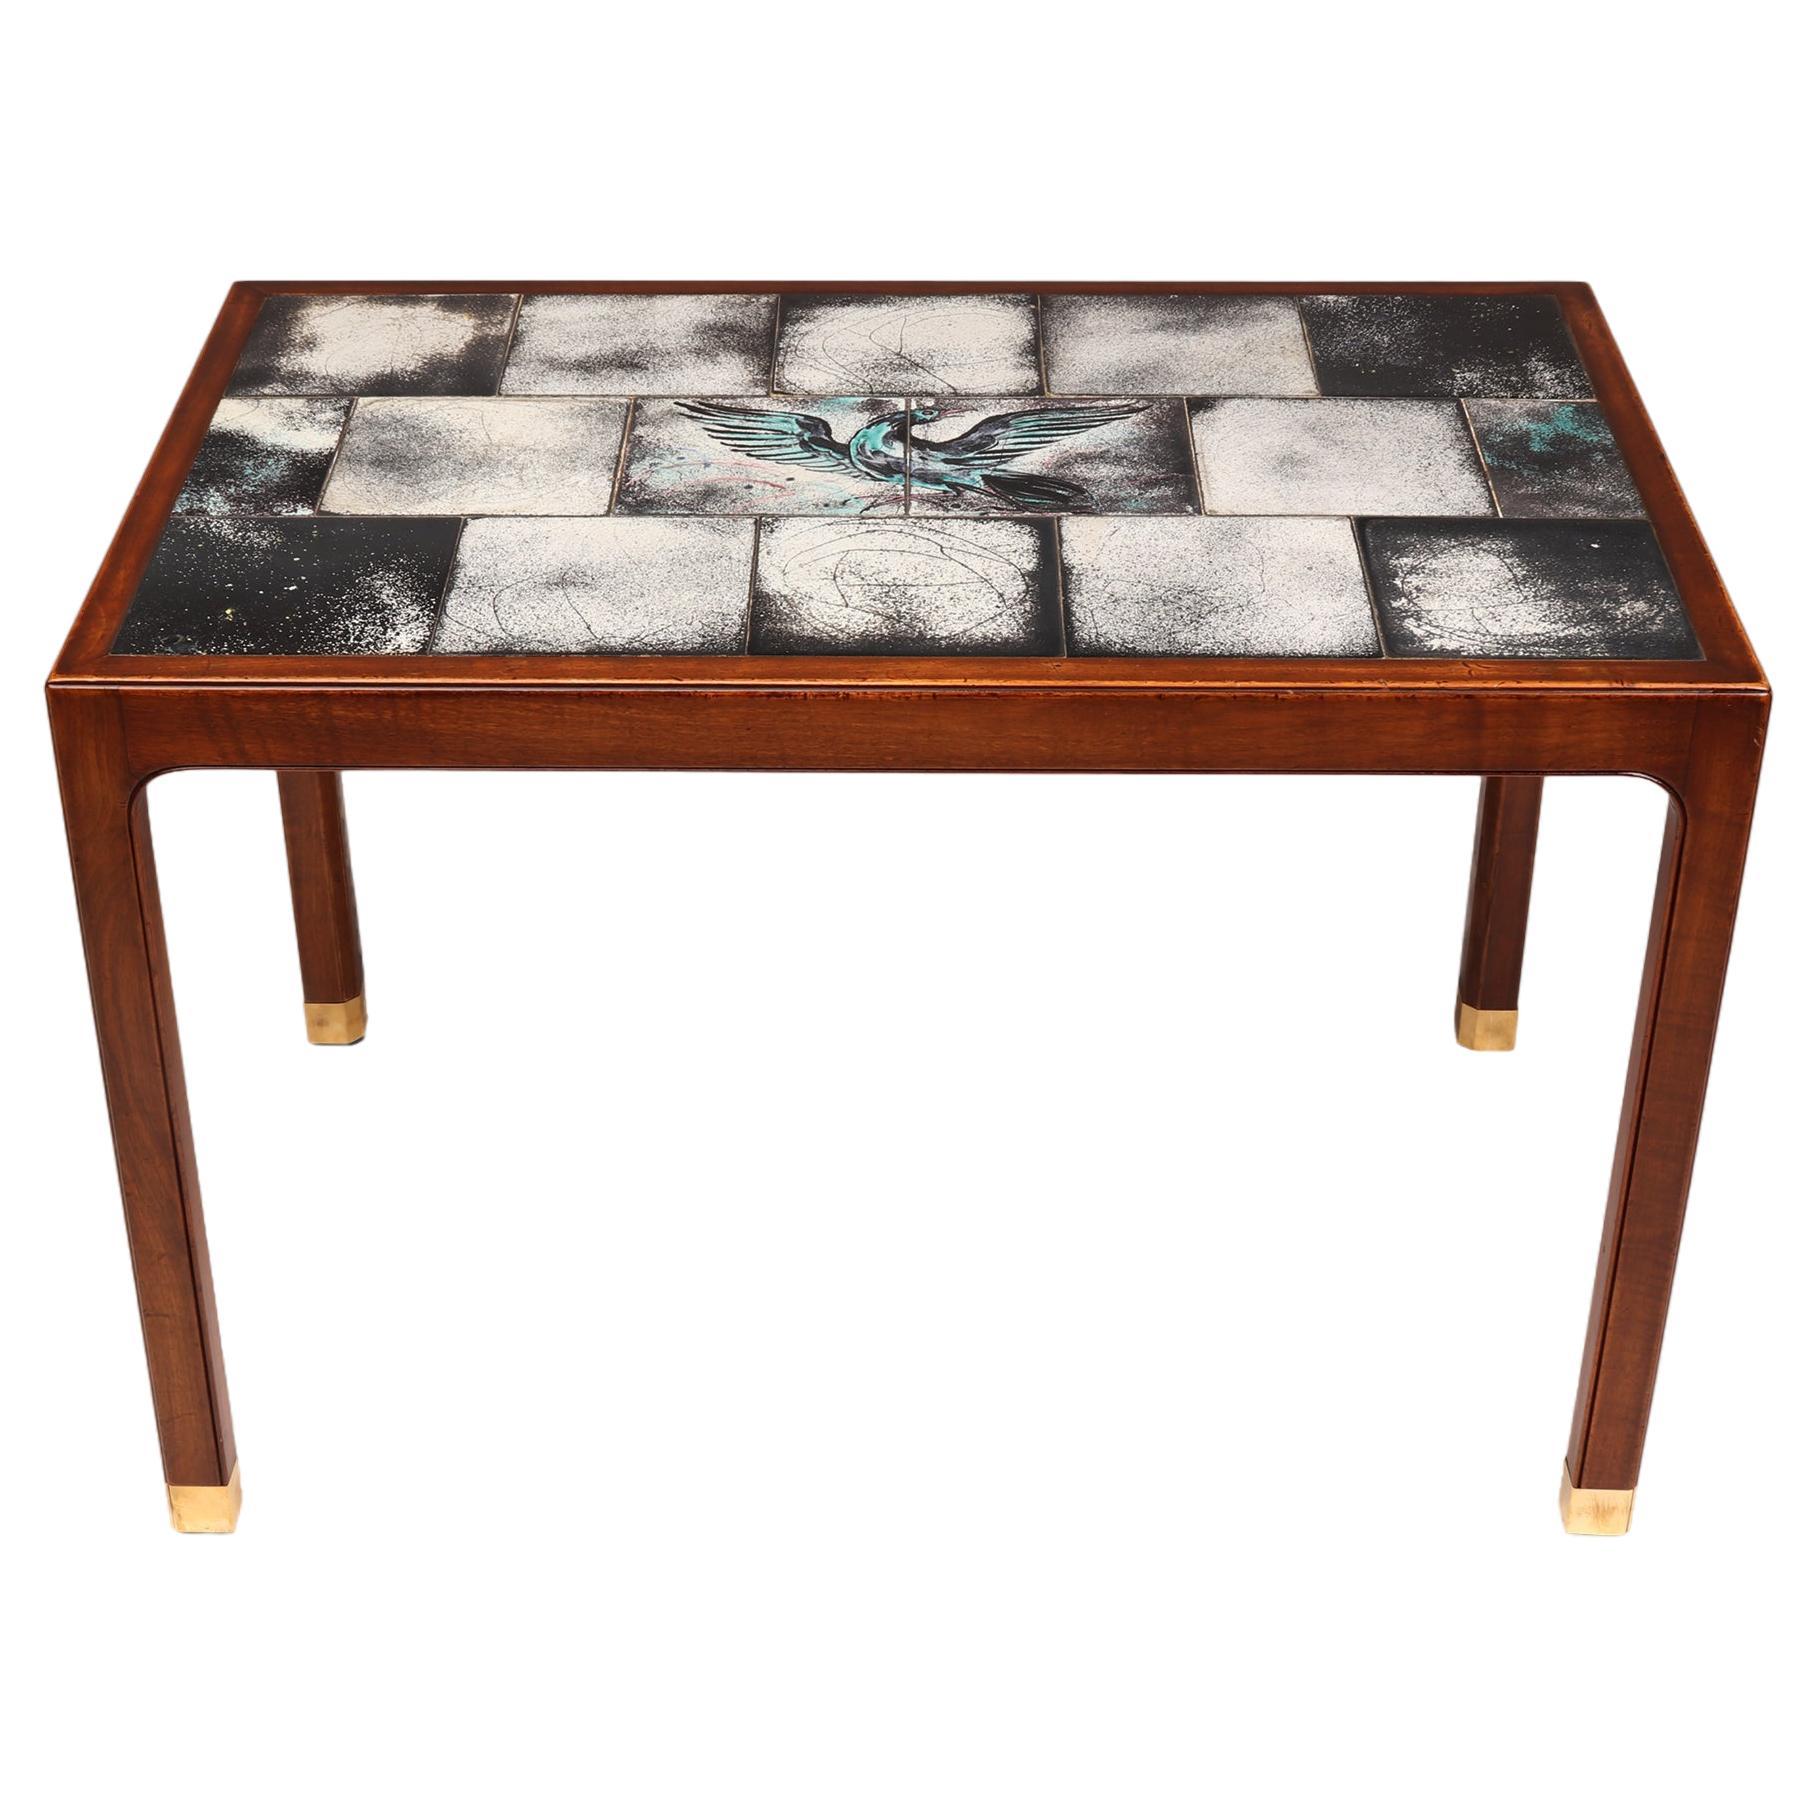 Coffee table with black/white inlaid tiles, turquoise details and brass feet. For Sale